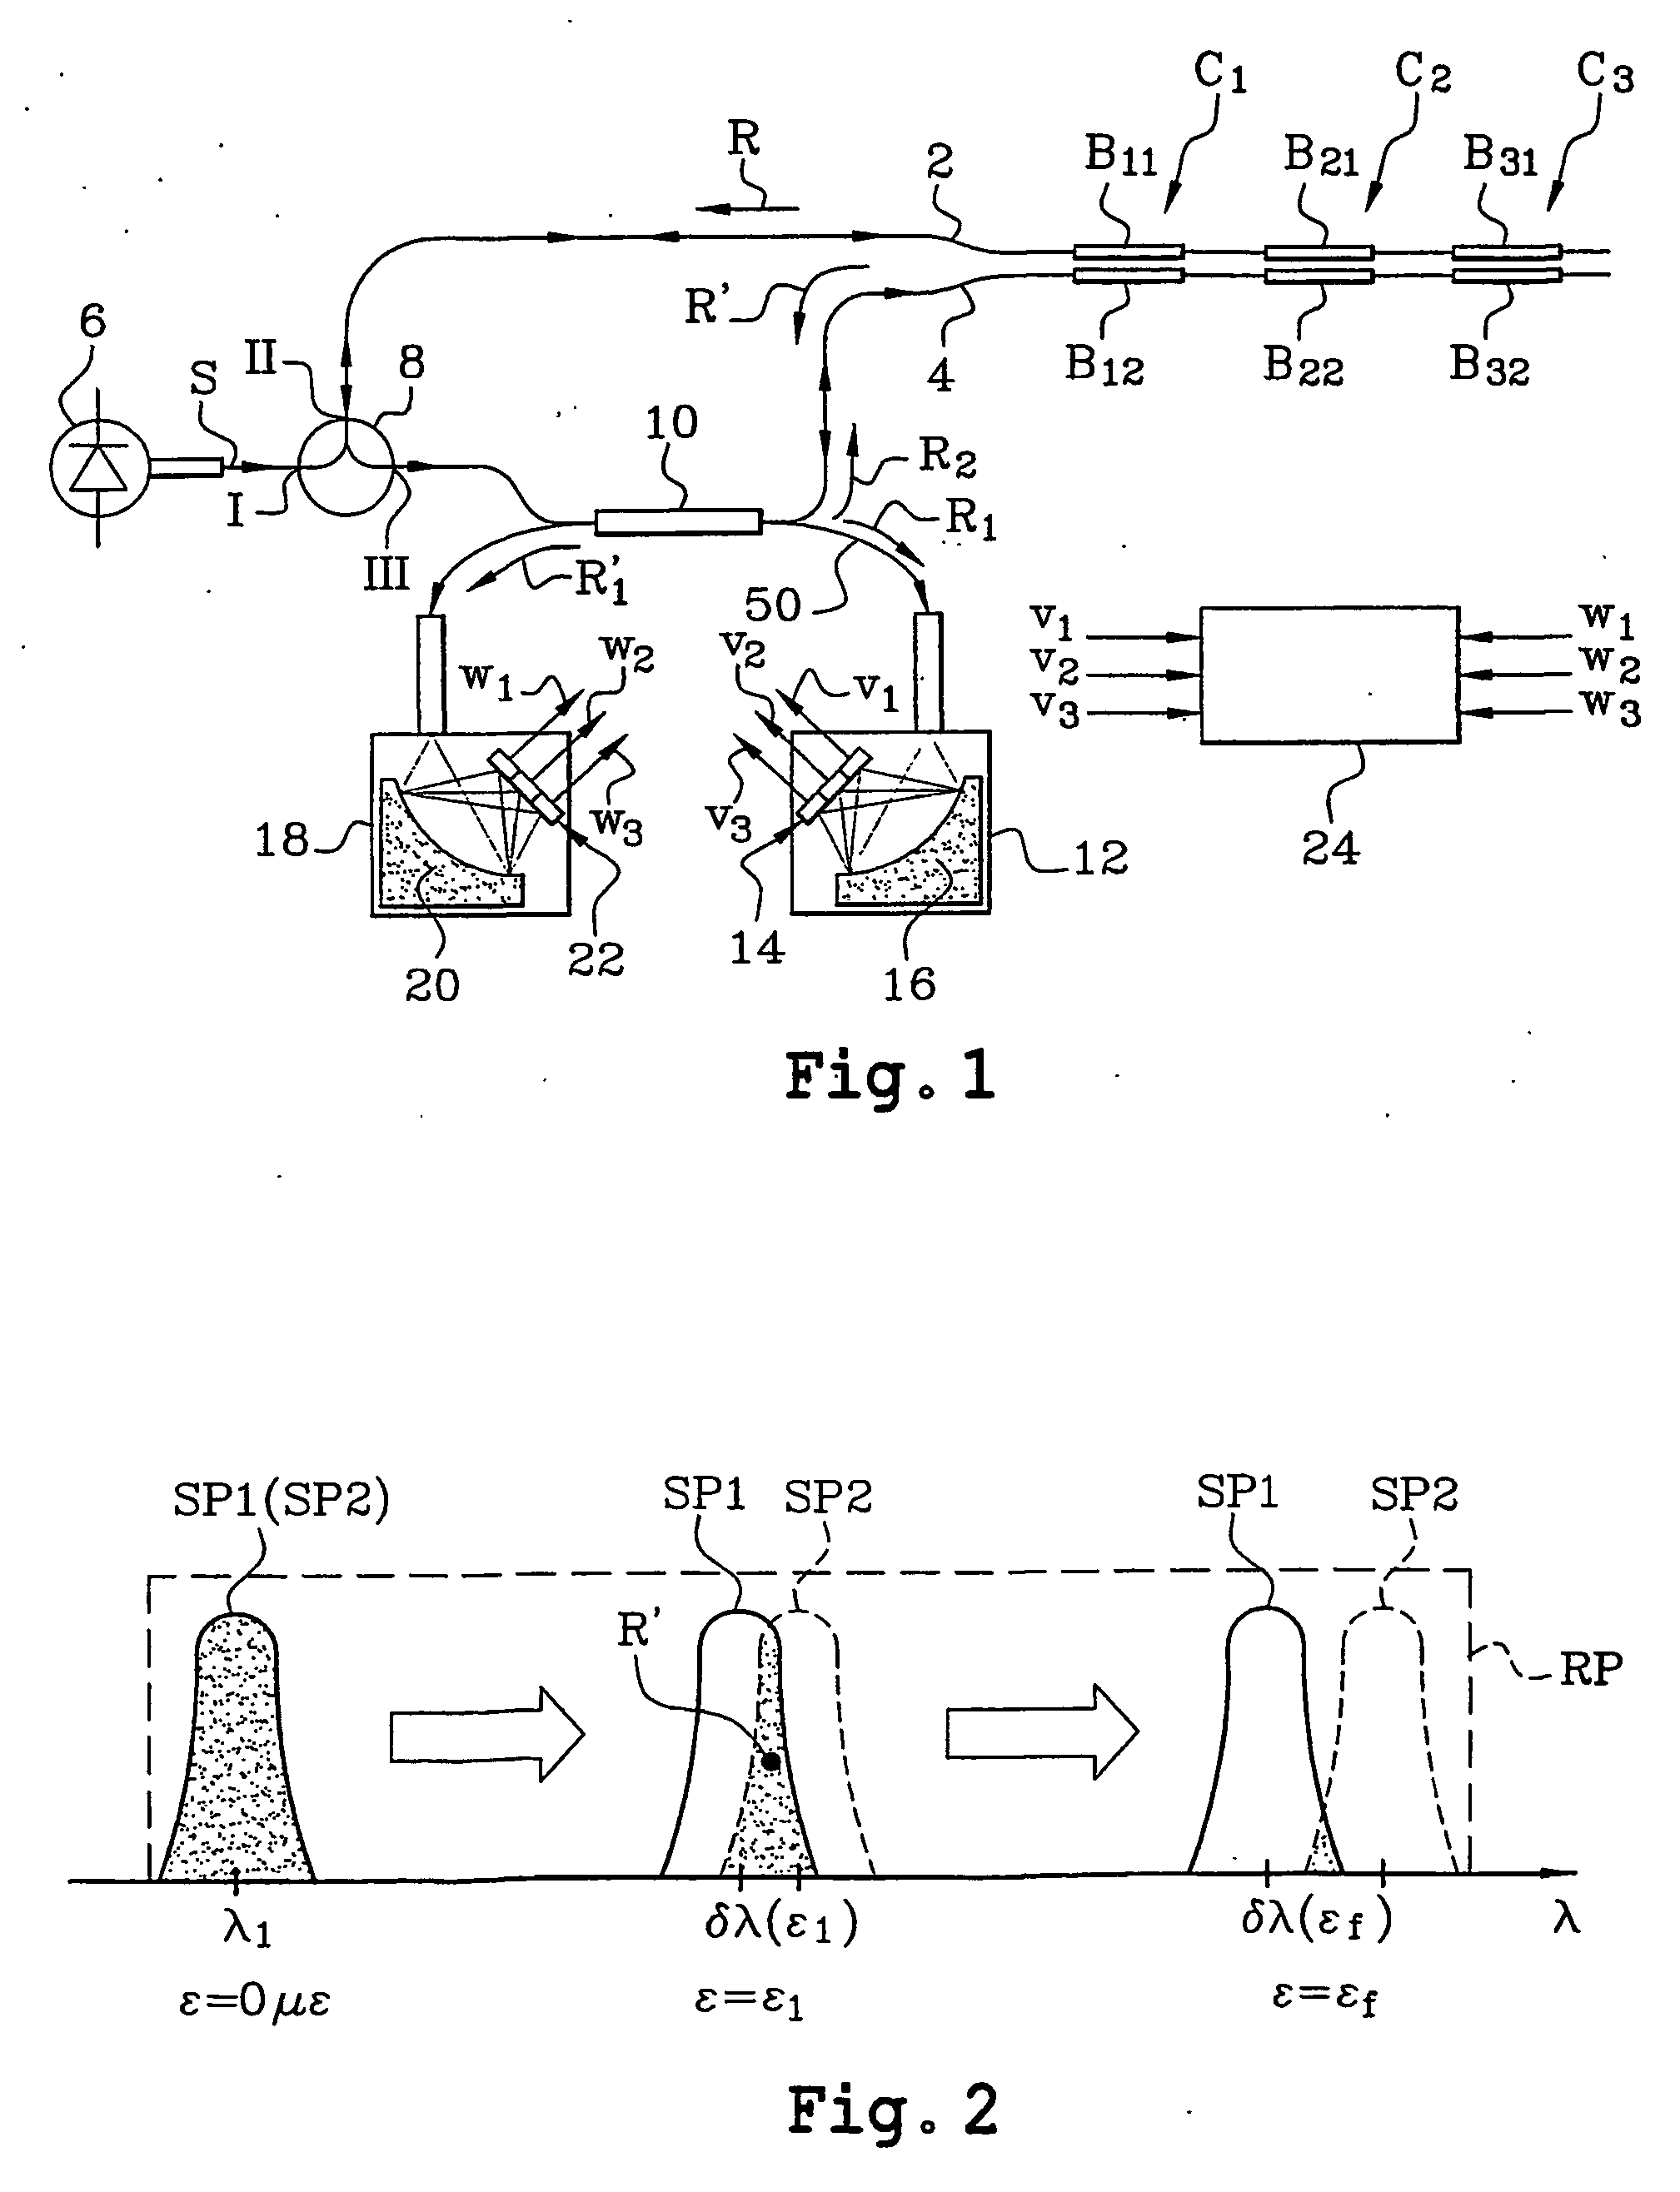 Differential measurement system based on the use of pairs of bragg gratings